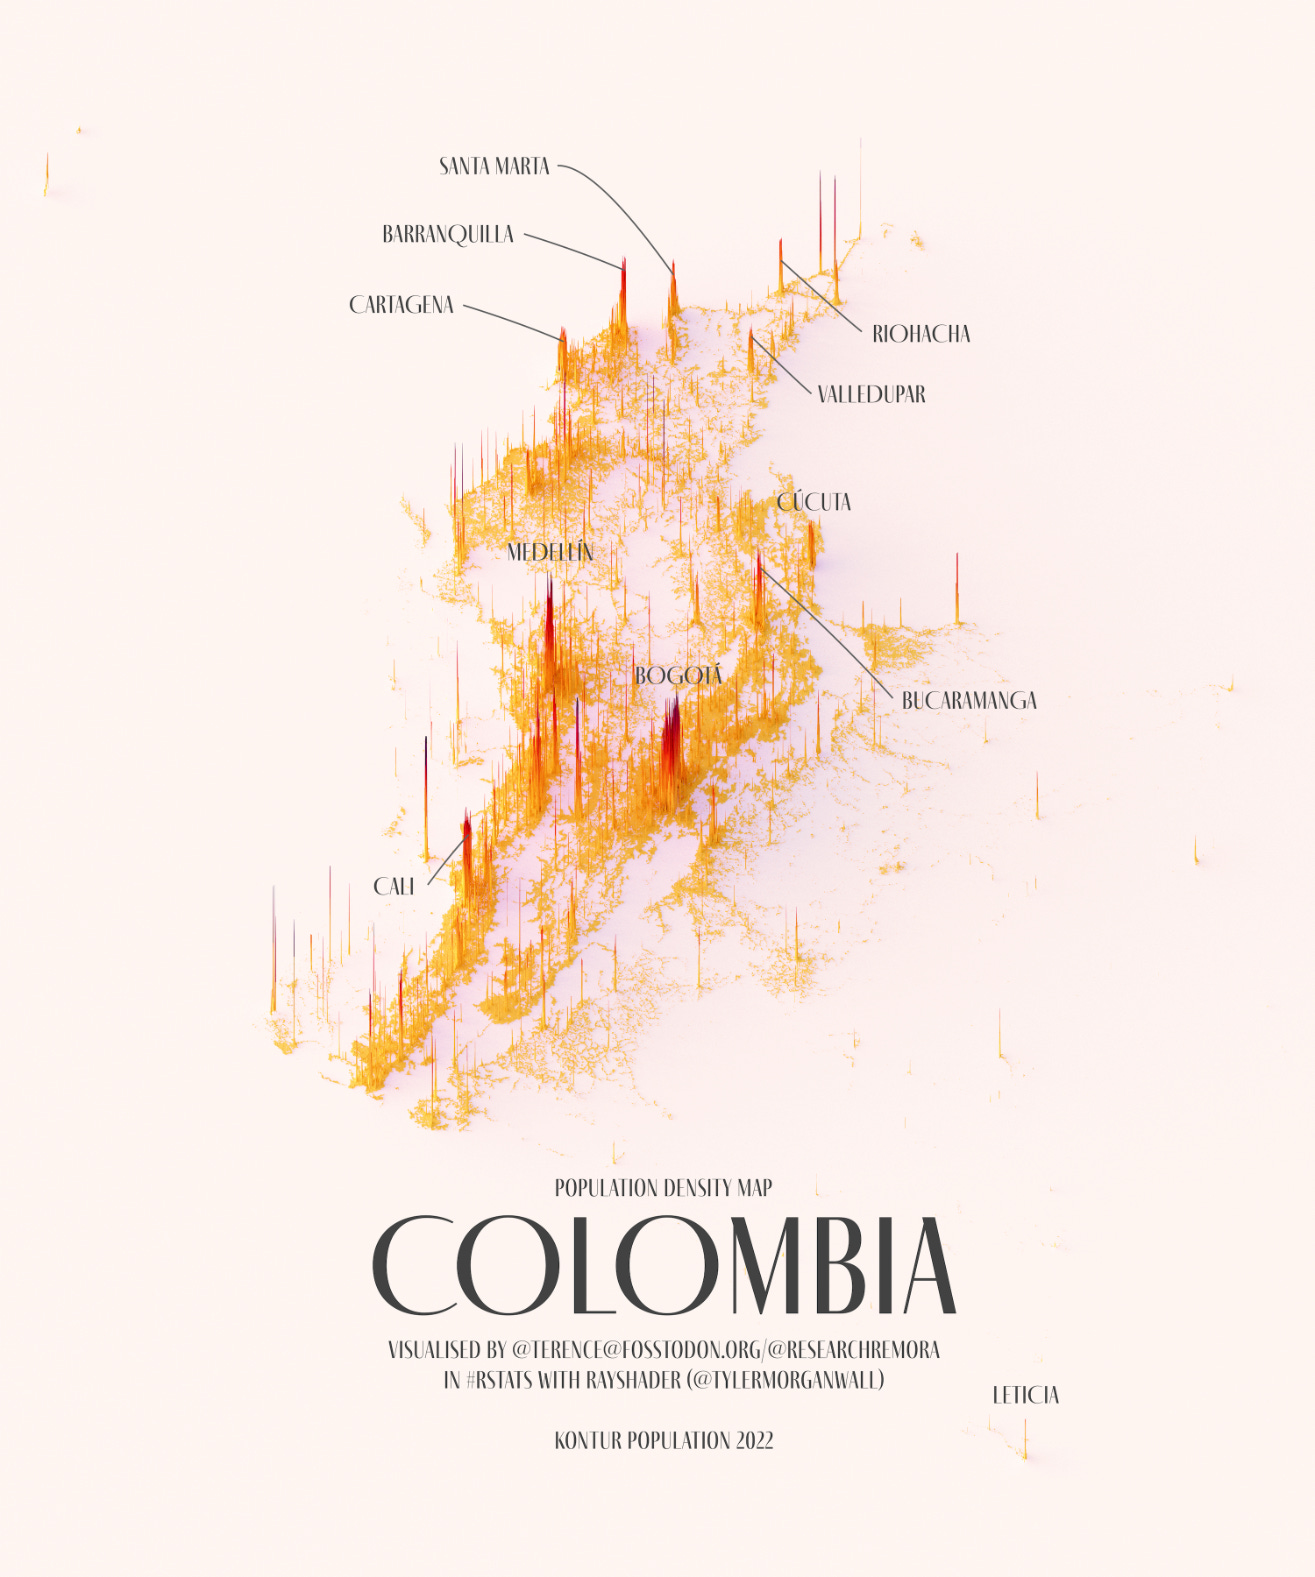 A population density map of Colombia